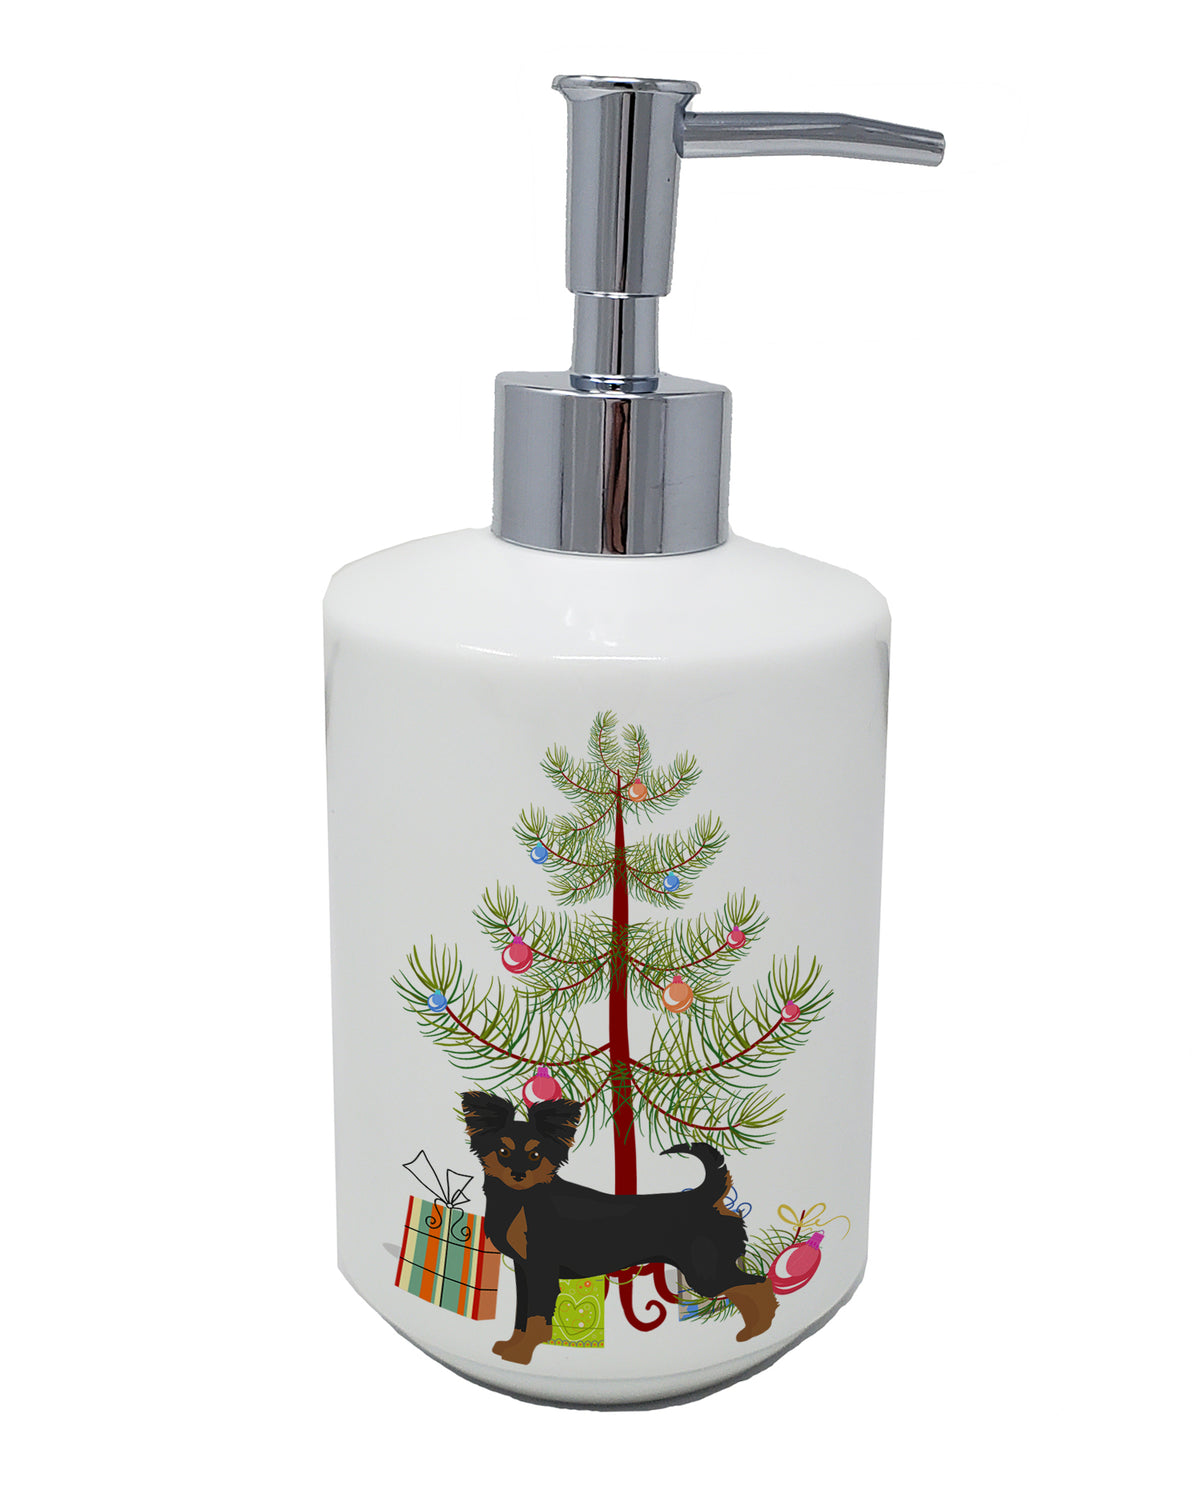 Buy this Black and Tan Chion Christmas Tree Ceramic Soap Dispenser